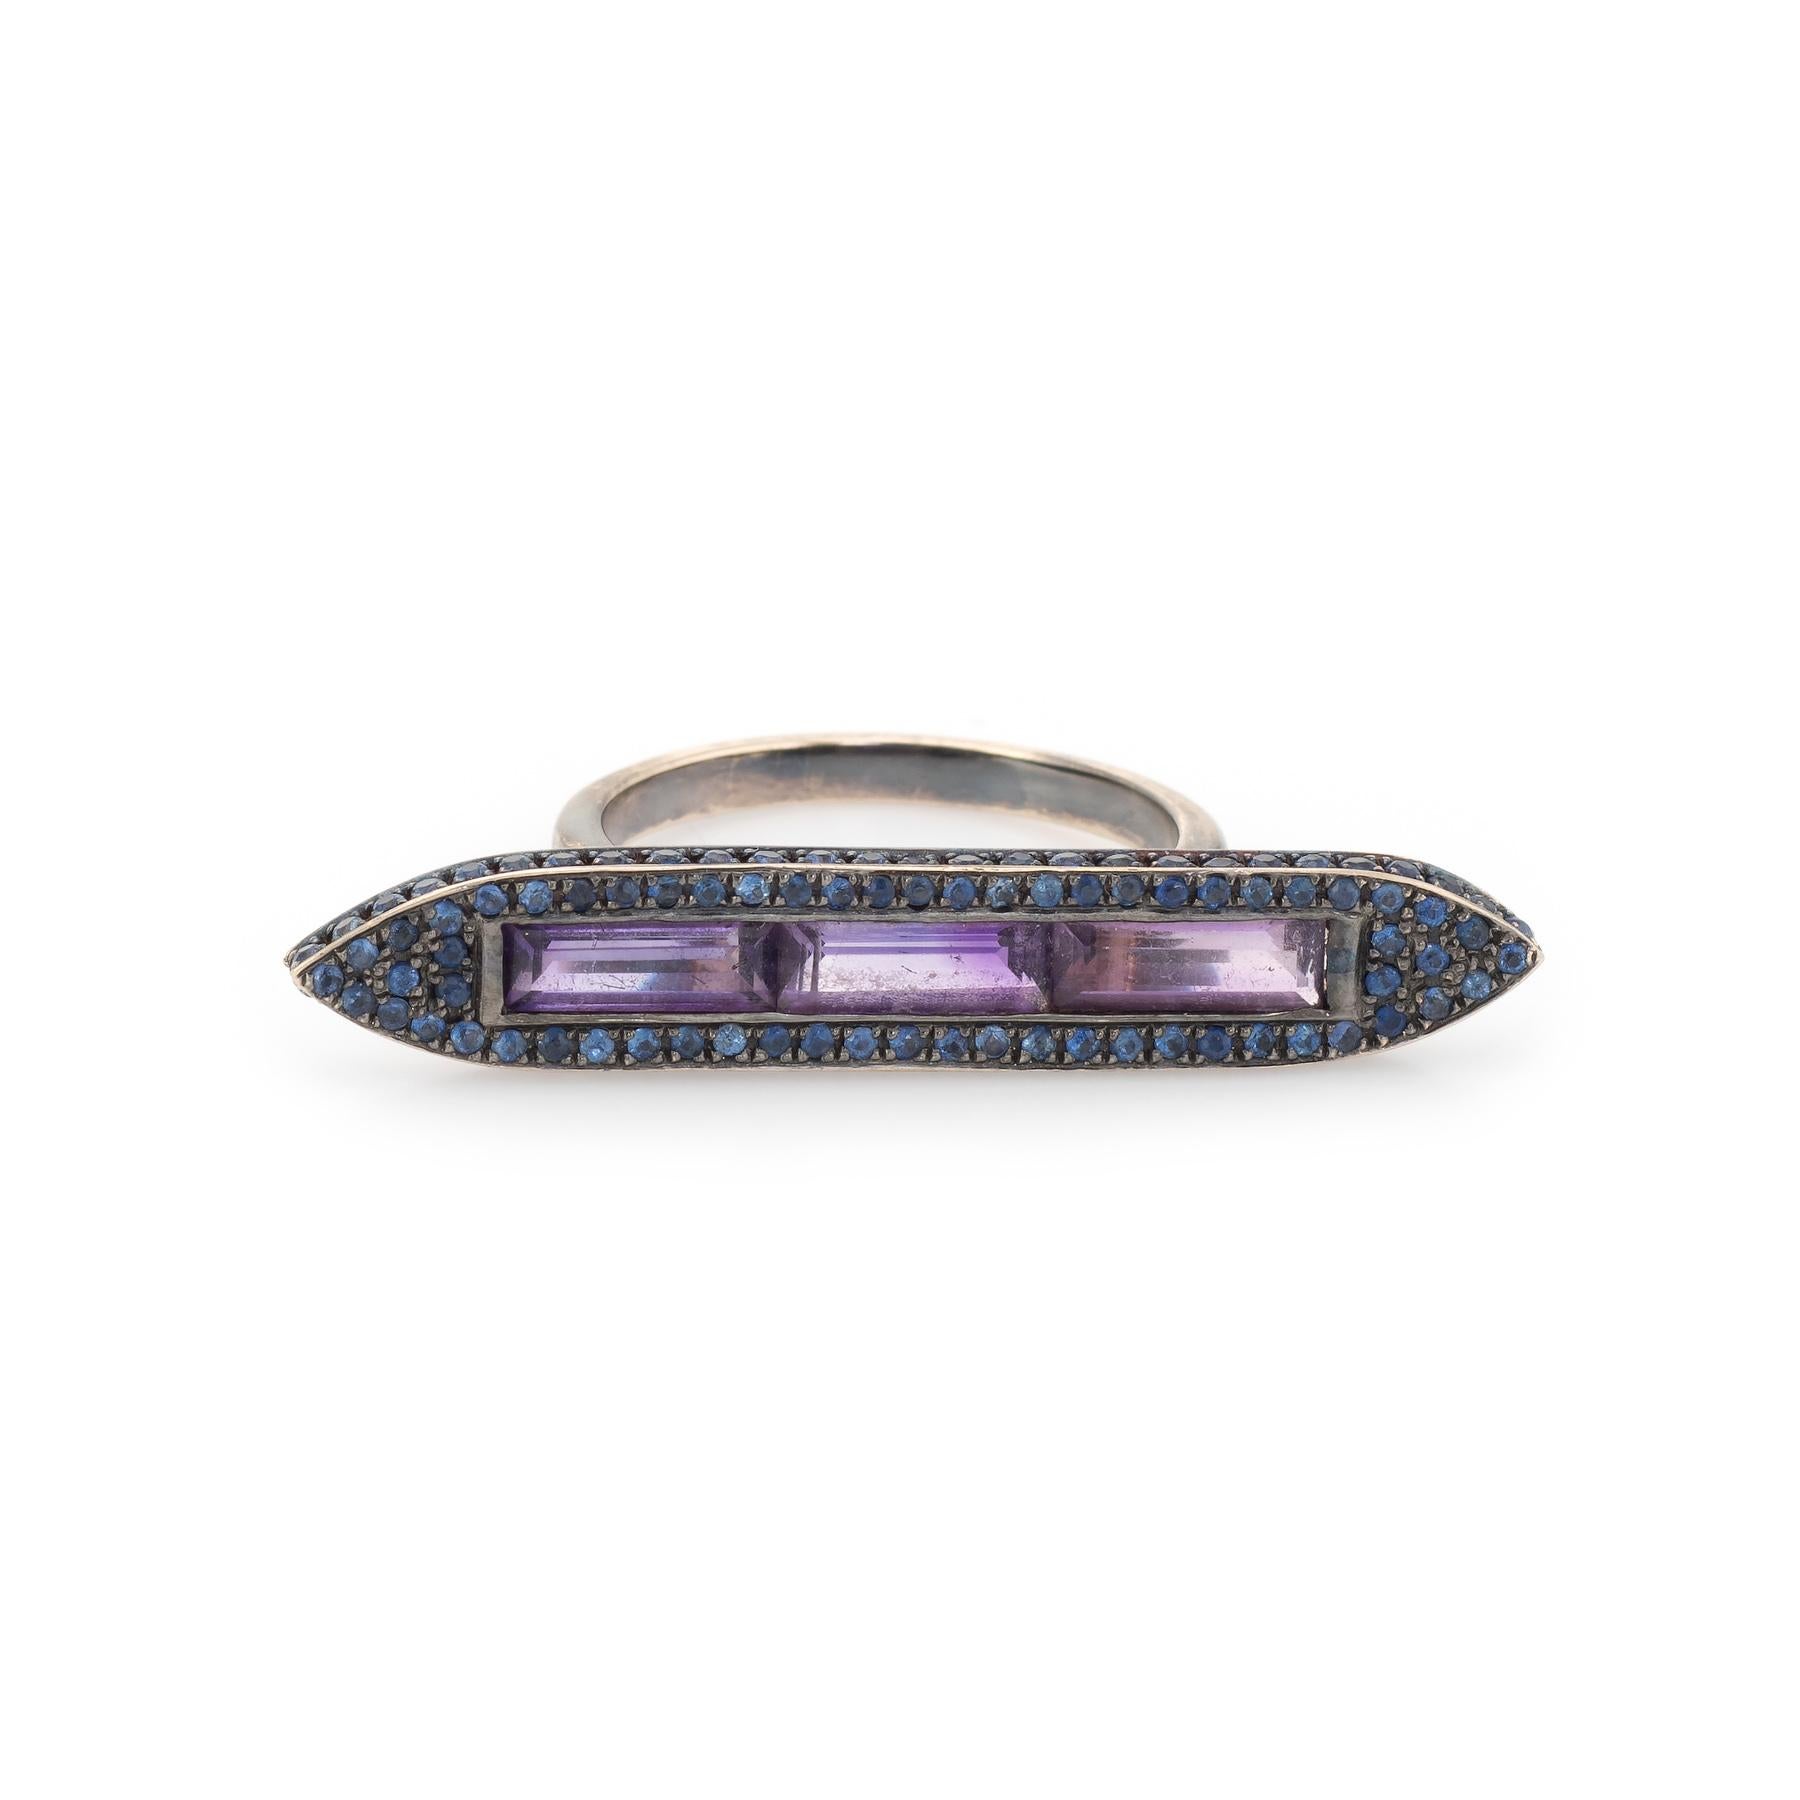 Finely detailed Ralph Masri Sacred Windows ring, crafted in 18 karat blackened white gold. 

Straight baguette cut amethysts measures 8mm x 2.5mm (each) and total an estimated 0.75 carats. Blue sapphires are pave set into the mount and total an